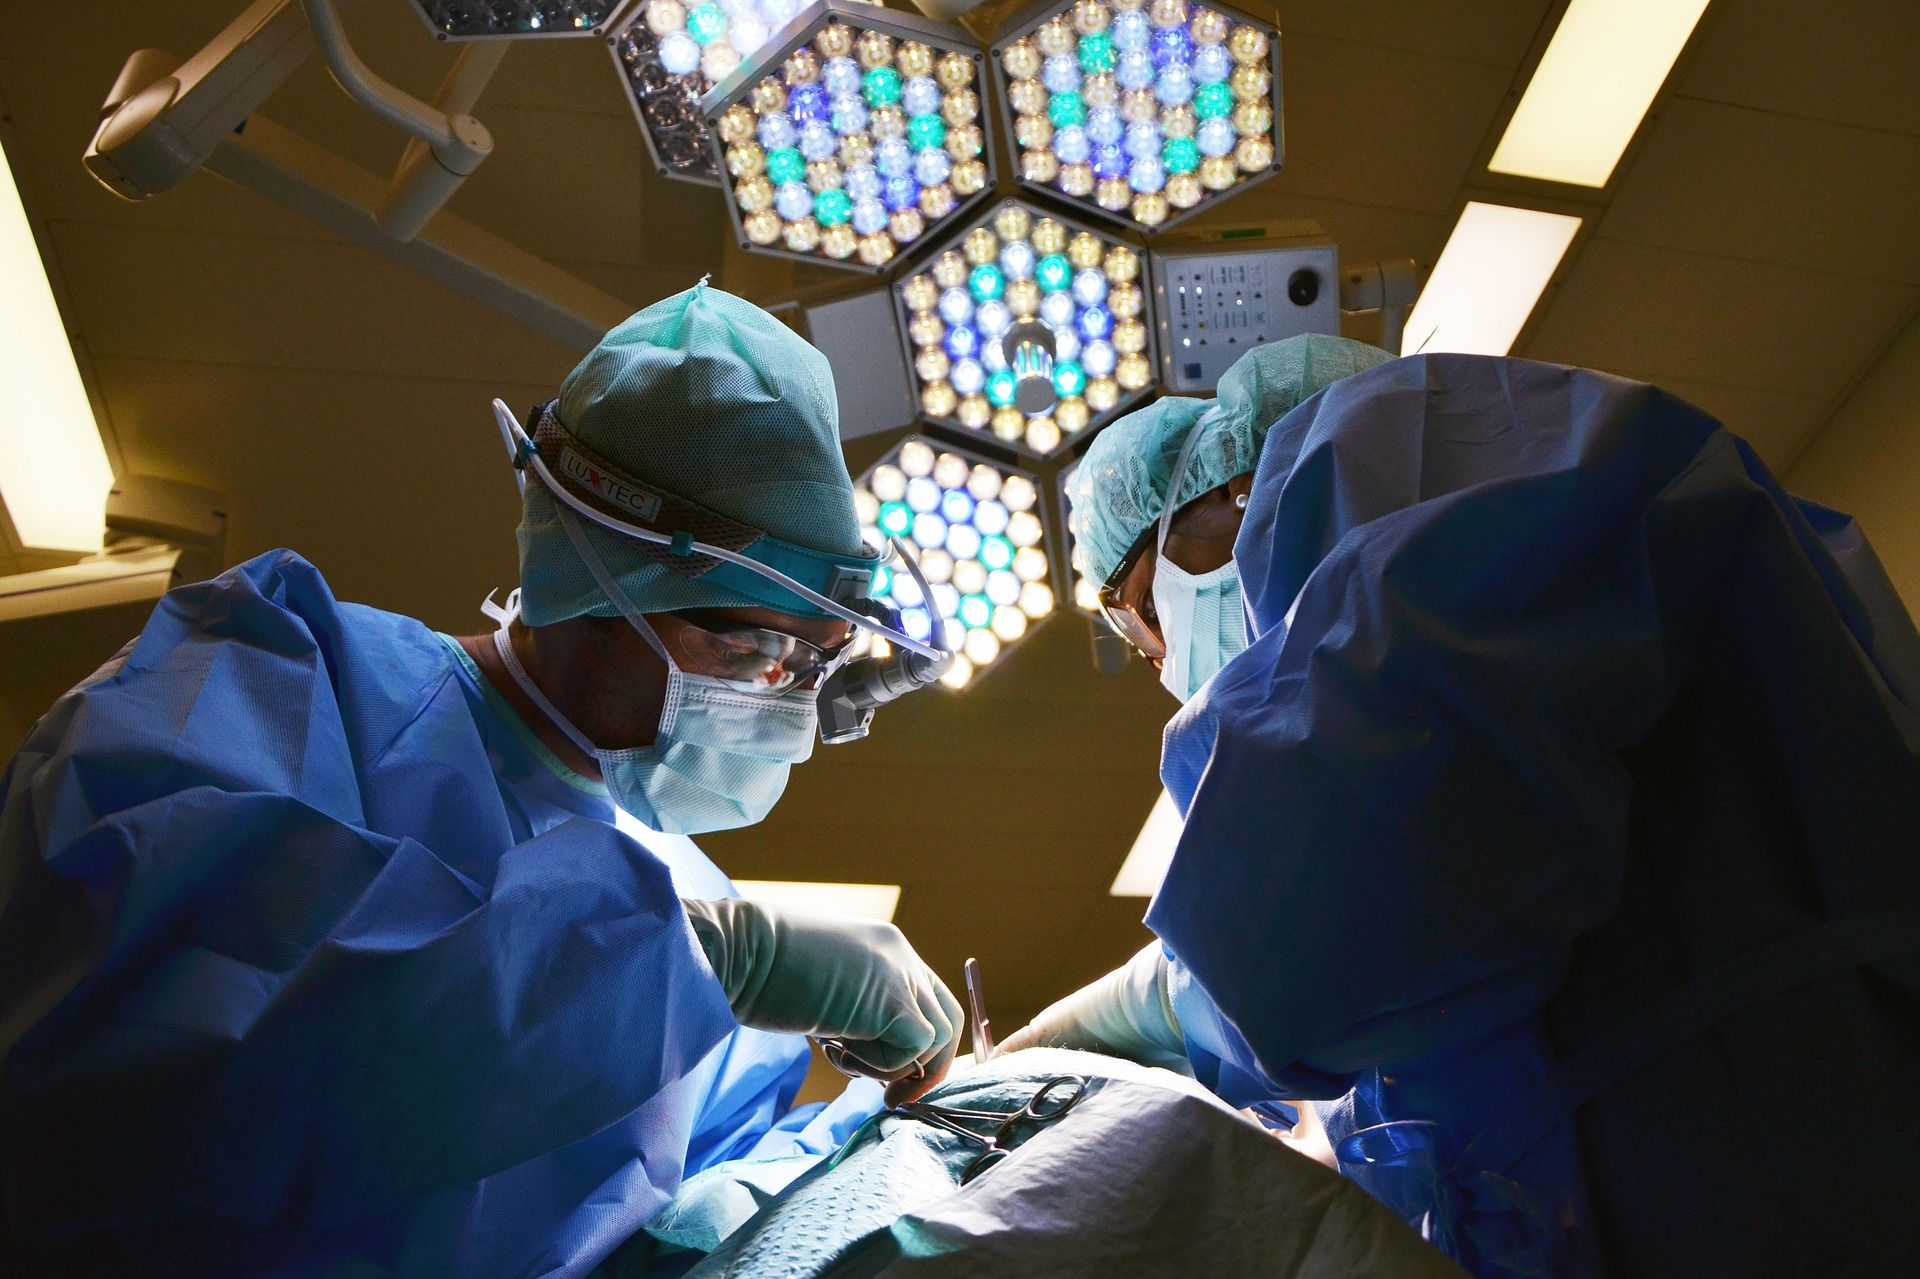 two doctors in full operating gear performing surgery on a patient